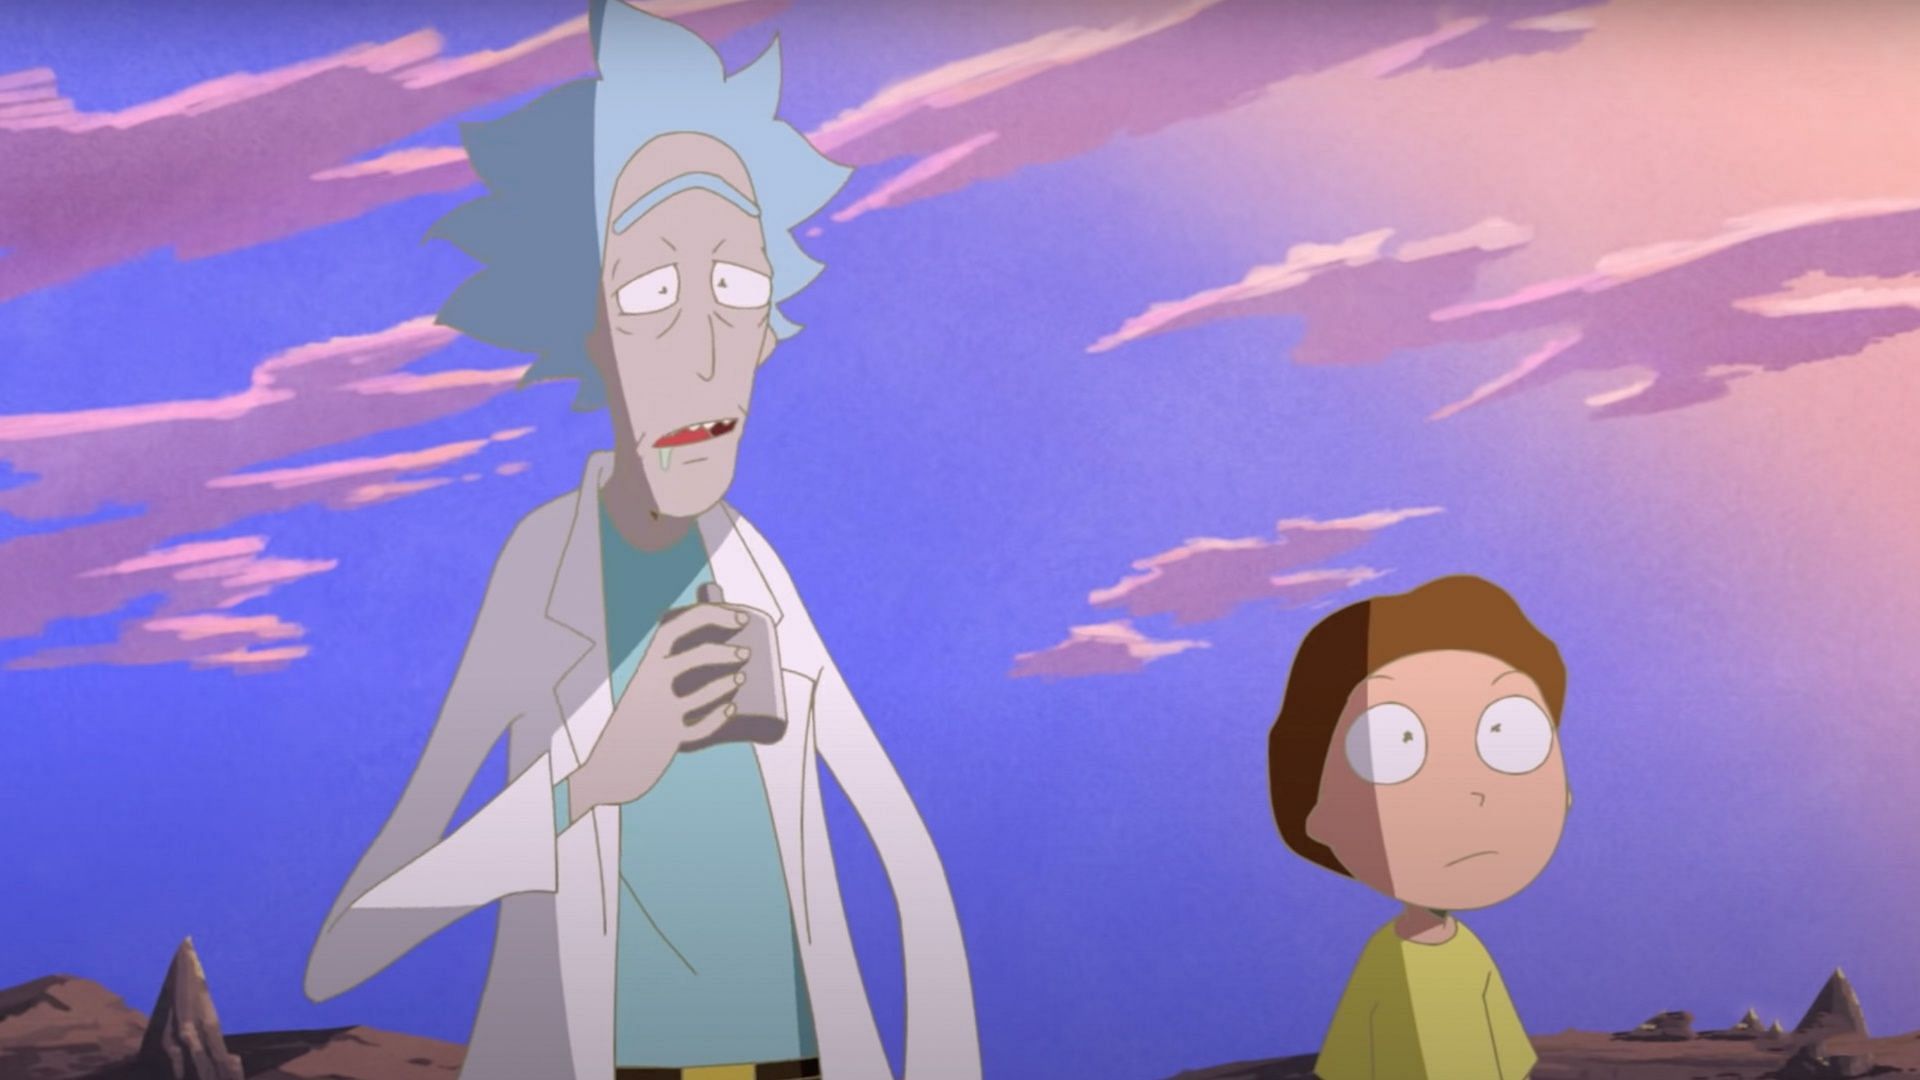 Rick and Morty: The Anime - Expected release date, cast, plot, and more (Image via Sola Entertainment, Telecom Animation Film)